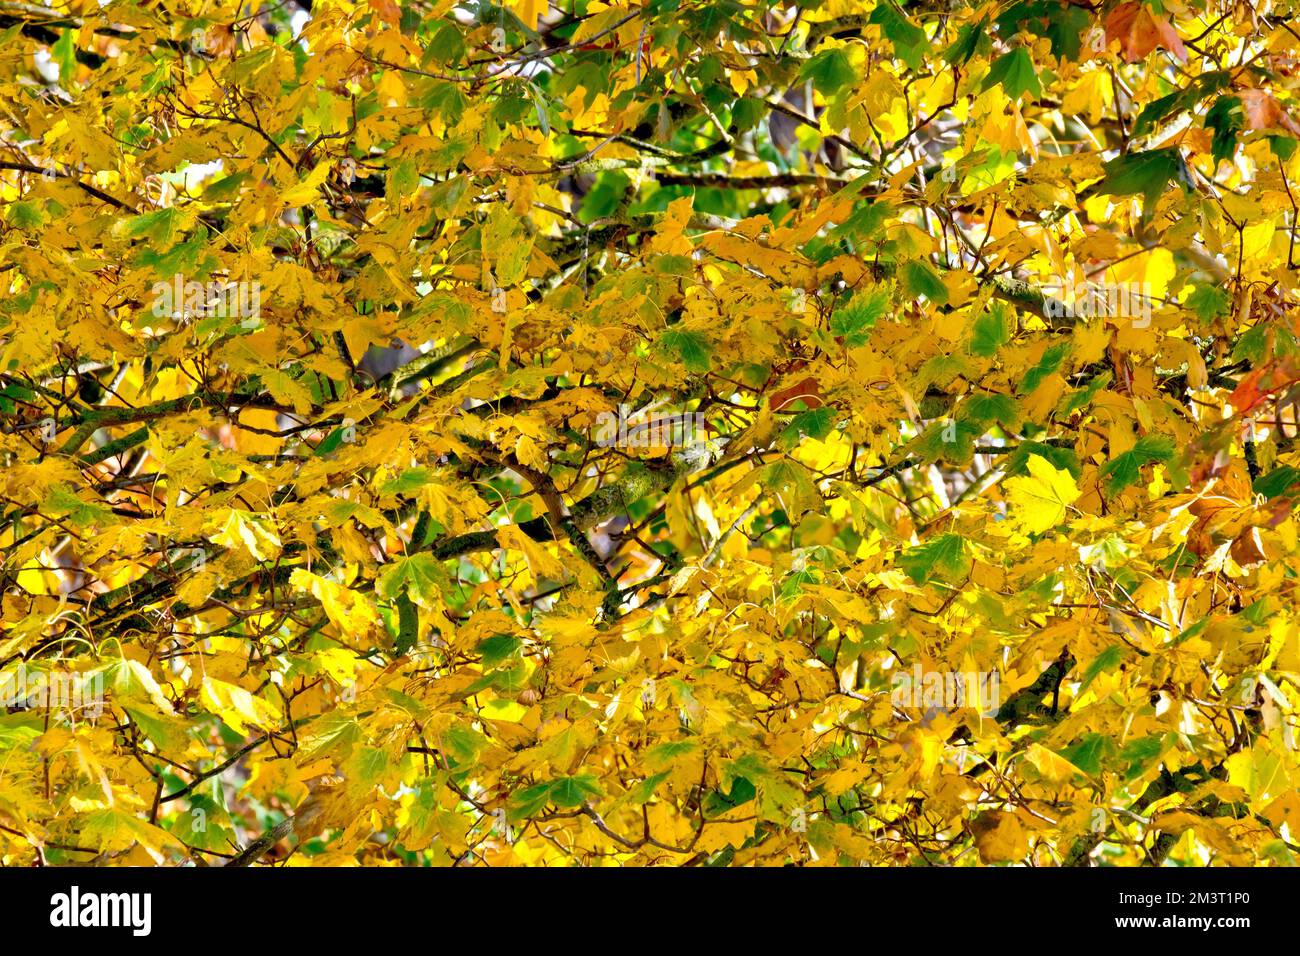 Sycamore (acer pseudoplatanus), showing the leaves of the tree as they change colour in the autumn. Stock Photo